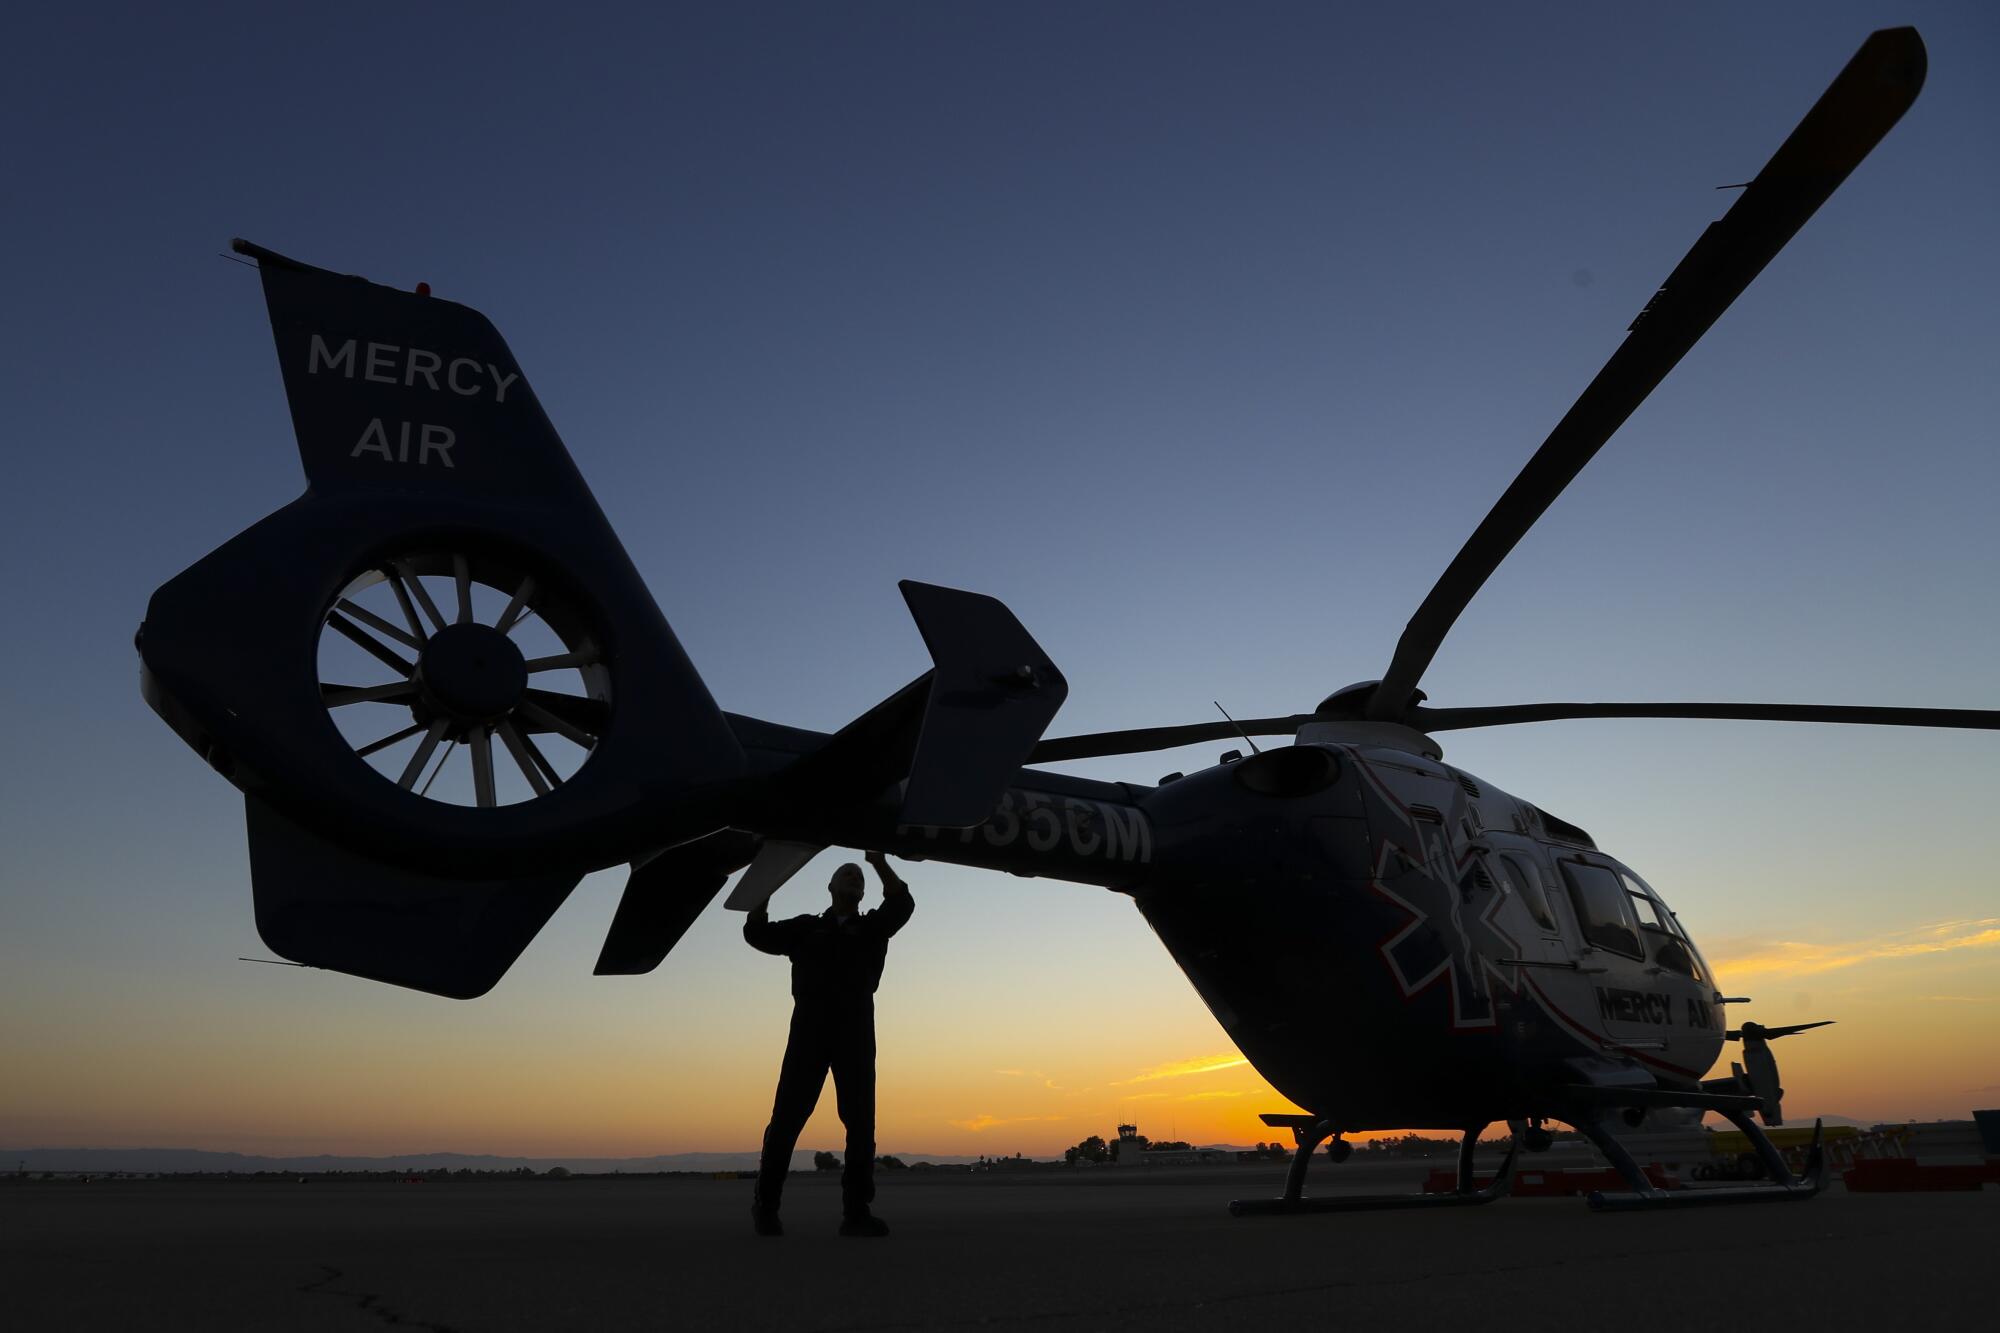 Pilot Michael Bobeck at the start of his 12 hour night shift checks Mercy Air helicopter at Imperial County Airport. 